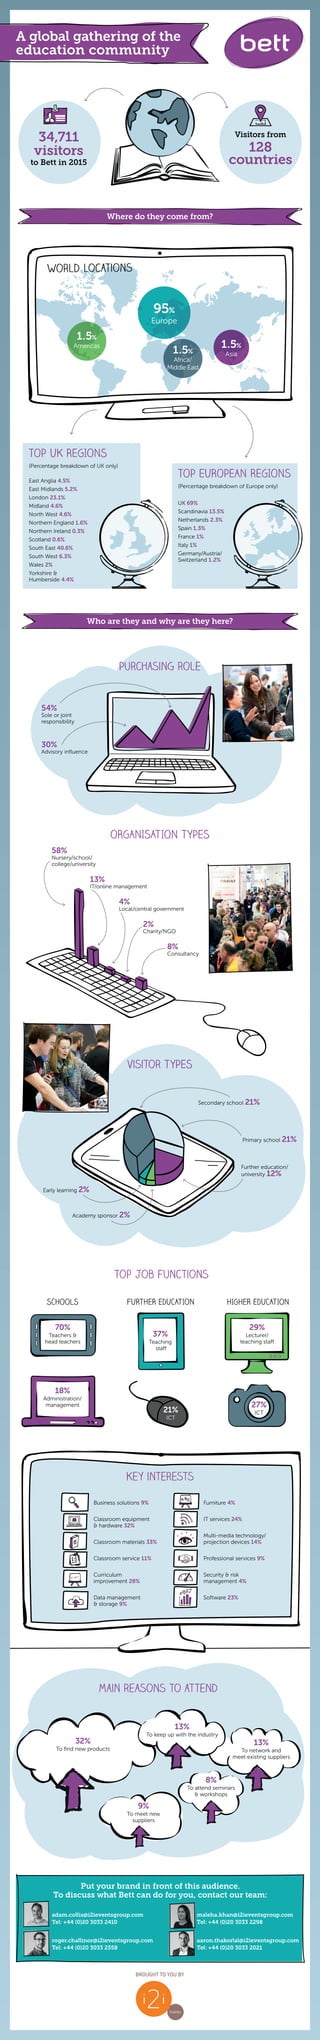 Visitor TYPES
Secondary school 21%
Primary school 21%
Further education/
university 12%
Early learning 2%
Academy sponsor 2%
A global gathering of the
education community
Who are they and why are they here?
Where do they come from?
34,711
visitors
to Bett in 2015
Visitors from
128
countries
Business solutions 9%
Classroom equipment
& hardware 32%
Classroom materials 33%
Classroom service 11%
Curriculum
improvement 28%
Data management
& storage 9%
Furniture 4%
IT services 24%
Multi-media technology/
projection devices 14%
Professional services 9%
Security & risk
management 4%
Software 23%
Key interests
Main reasons to attend
32%
To ﬁnd new products
13%
To keep up with the industry
13%
To network and
meet existing suppliers
9%
To meet new
suppliers
8%
To attend seminars
& workshops
TOP UK REGIONS
(Percentage breakdown of UK only)
East Anglia 4.5%
East Midlands 5.2%
London 23.1%
Midland 4.6%
North West 4.6%
Northern England 1.6%
Northern Ireland 0.3%
Scotland 0.6%
South East 40.6%
South West 6.3%
Wales 2%
Yorkshire &
Humberside 4.4%
TOP EUROPEAN REGIONS
(Percentage breakdown of Europe only)
UK 69%
Scandinavia 13.5%
Netherlands 2.3%
Spain 1.3%
France 1%
Italy 1%
Germany/Austria/
Switzerland 1.2%
World locations
95%
Europe
1.5%
Asia1.5%
Africa/
Middle East
1.5%
Americas
70%
Teachers &
head teachers
18%
Administration/
management
Top job functions
SCHOOLS HIGHER EDUCATIONFURTHER EDUCATION
37%
Teaching
staff
29%
Lecturer/
teaching staff
21%
ICT
27%
ICT
ORGANISATION TYPES
58%
Nursery/school/
college/university
4%
Local/central government
8%
Consultancy
13%
IT/online management
2%
Charity/NGO
Put your brand in front of this audience.
To discuss what Bett can do for you, contact our team:
adam.collis@i2ieventsgroup.com
Tel: +44 (0)20 3033 2410
roger.challinor@i2ieventsgroup.com
Tel: +44 (0)20 3033 2558
maleha.khan@i2ieventsgroup.com
Tel: +44 (0)20 3033 2298
aaron.thakorlal@i2ieventsgroup.com
Tel: +44 (0)20 3033 2021
Purchasing role
54%
Sole or joint
responsibility
30%
Advisory inﬂuence
 